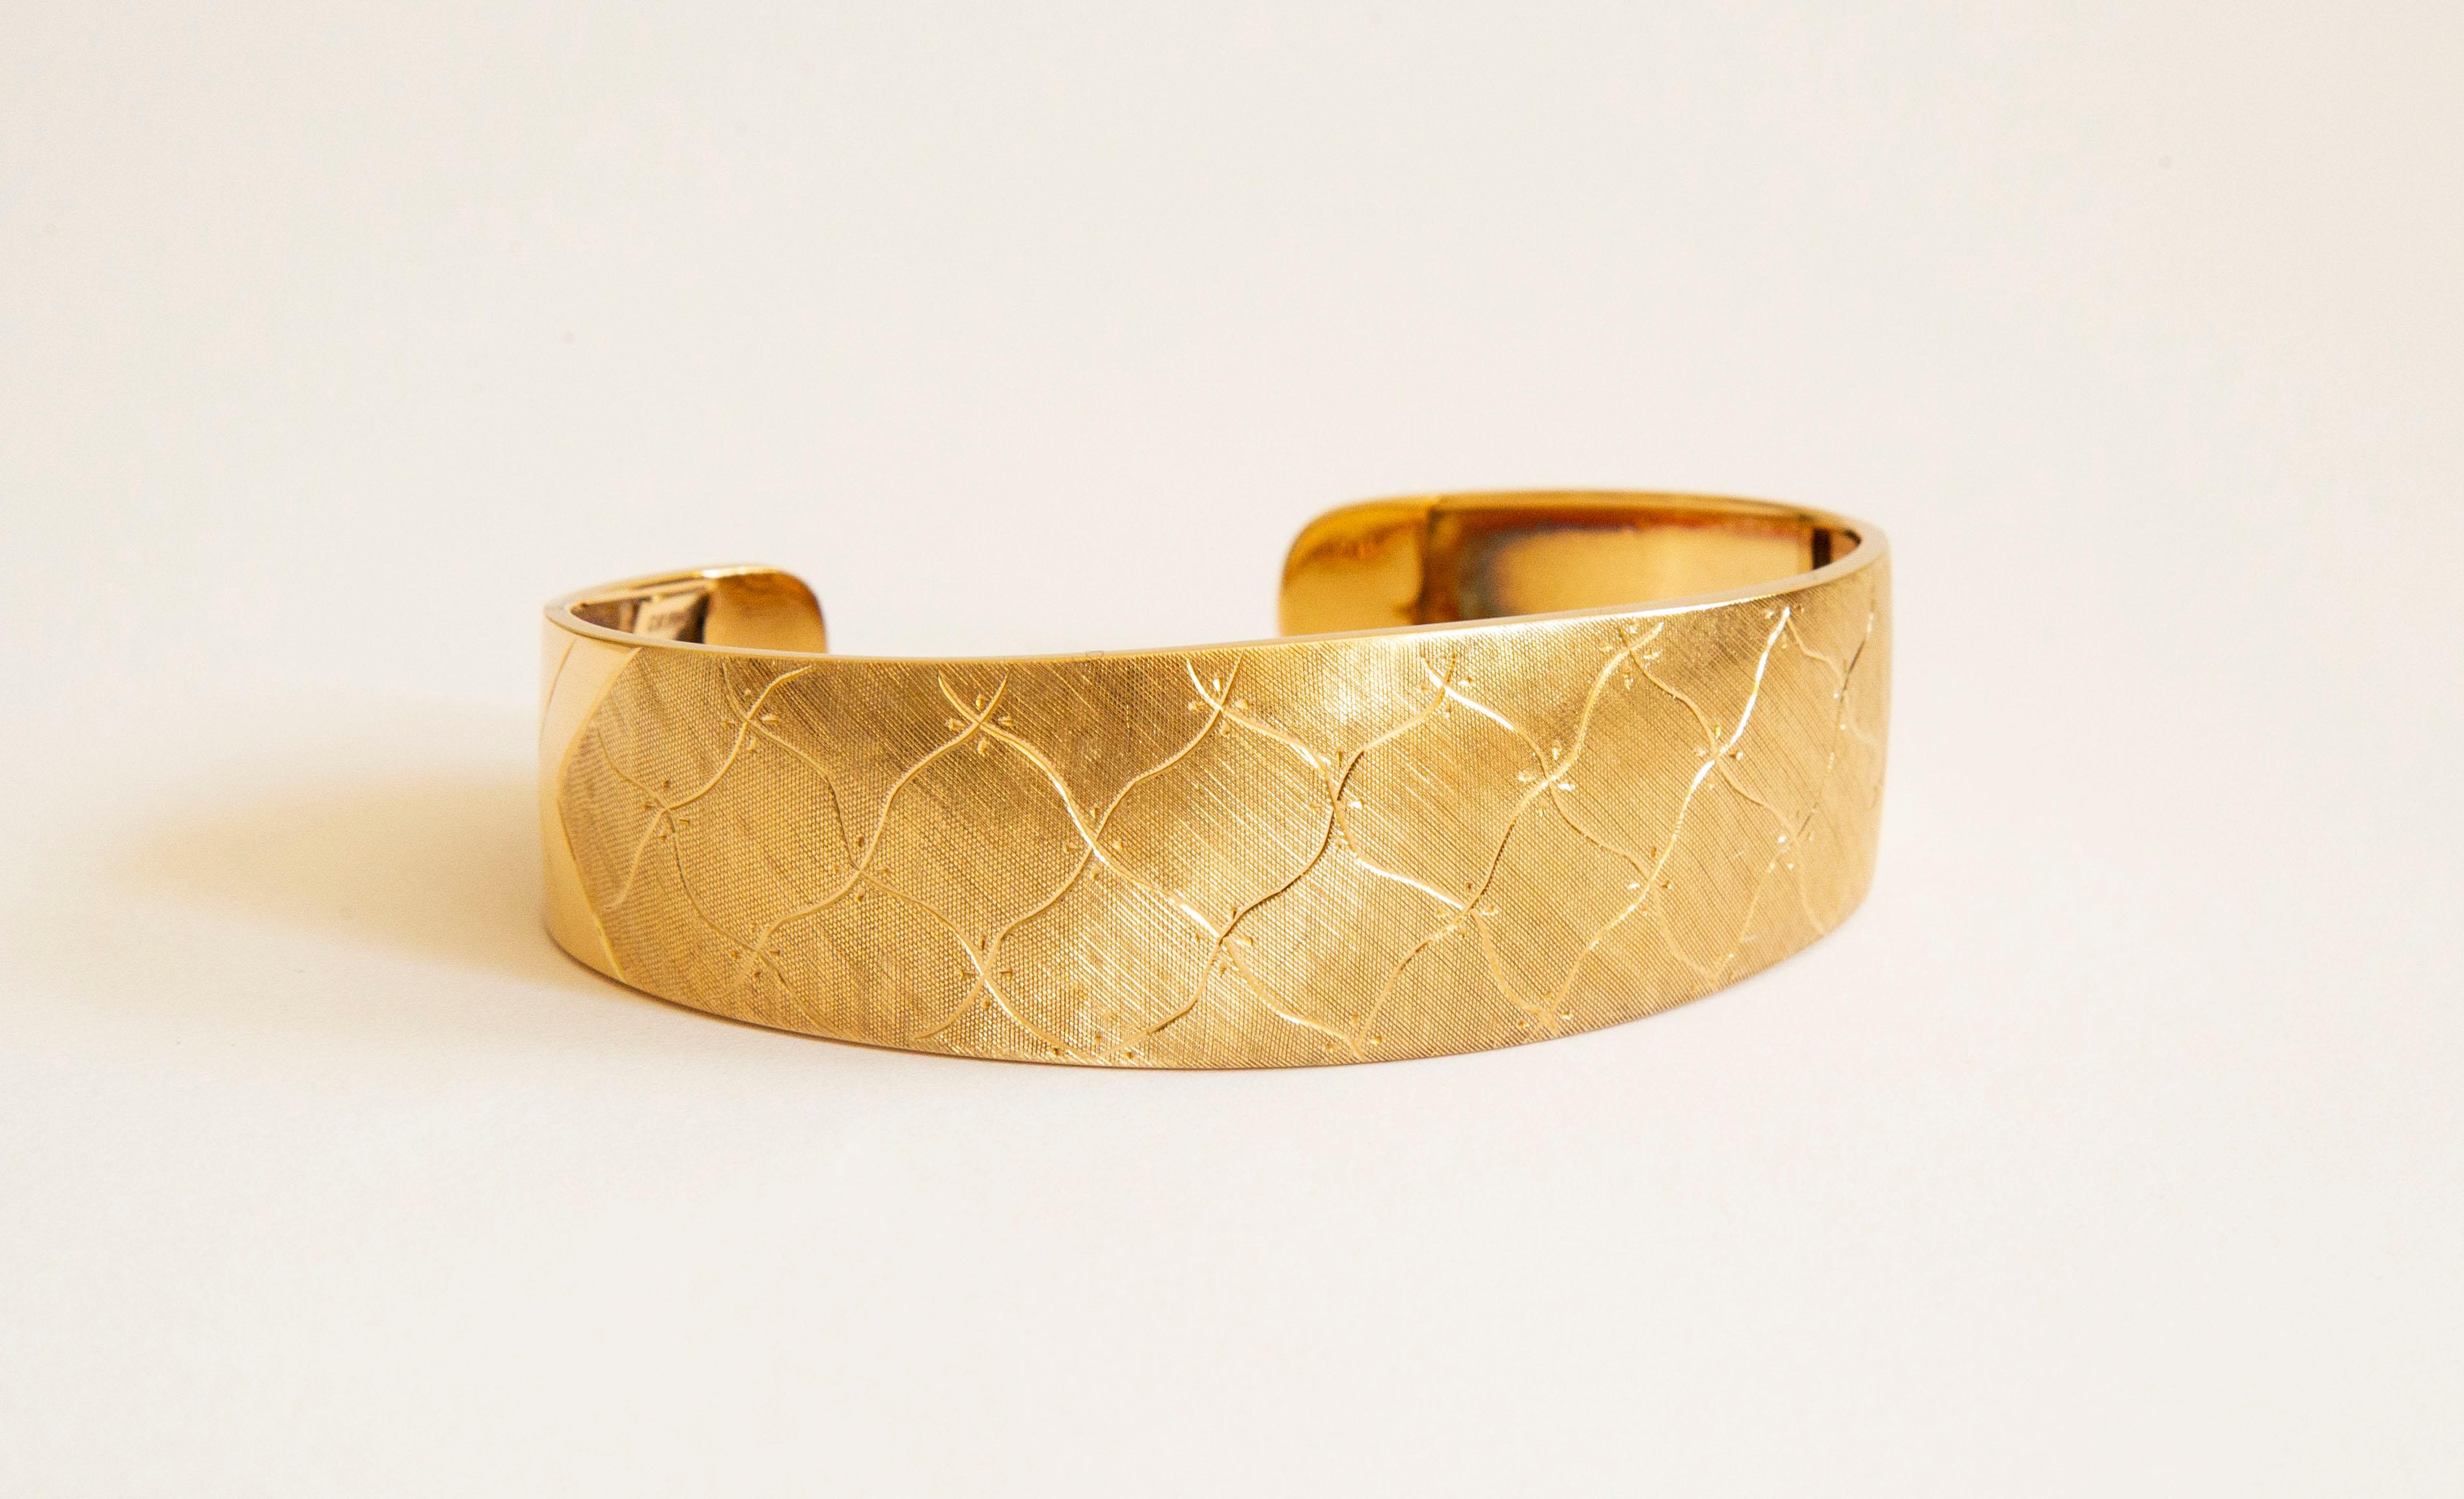 A vintage 18 karat yellow gold cuff bracelet. The bracelet is engraved with an abstract and irregular diamond pattern, and it features a satin/matt finish. The pattern and the finish cover the top and partially the side parts of the bracelet. The